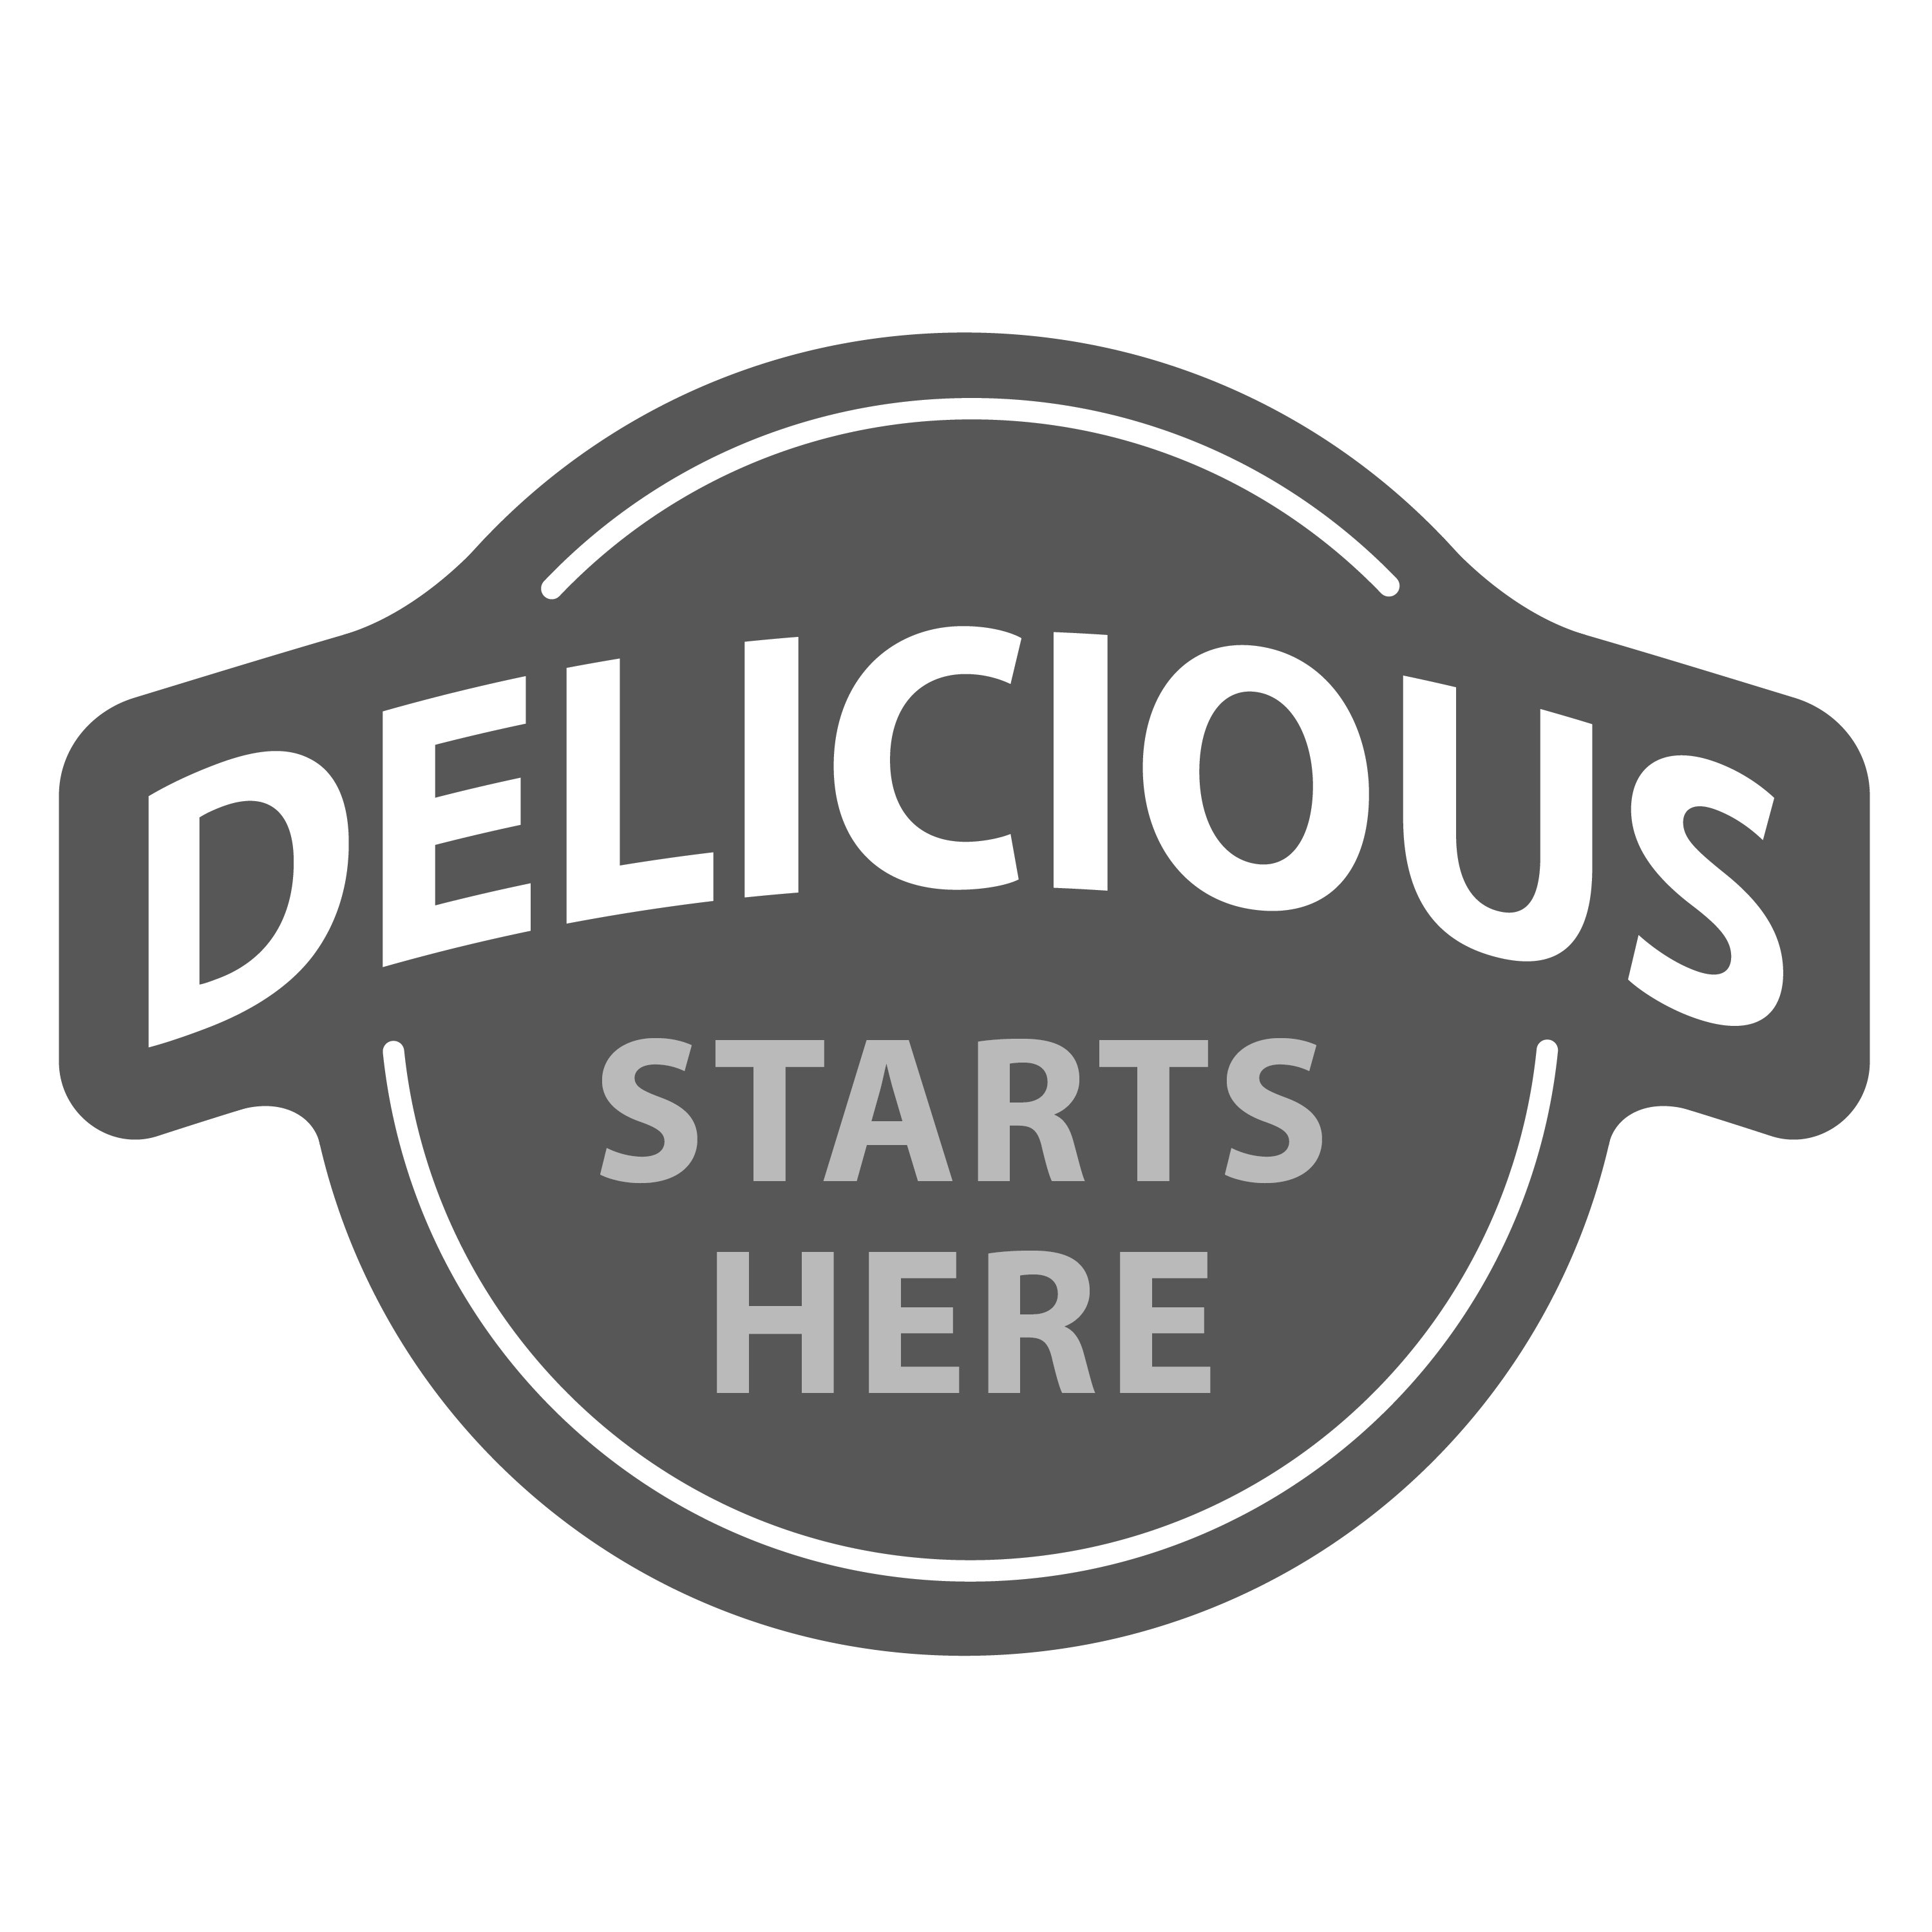  DELICIOUS STARTS HERE